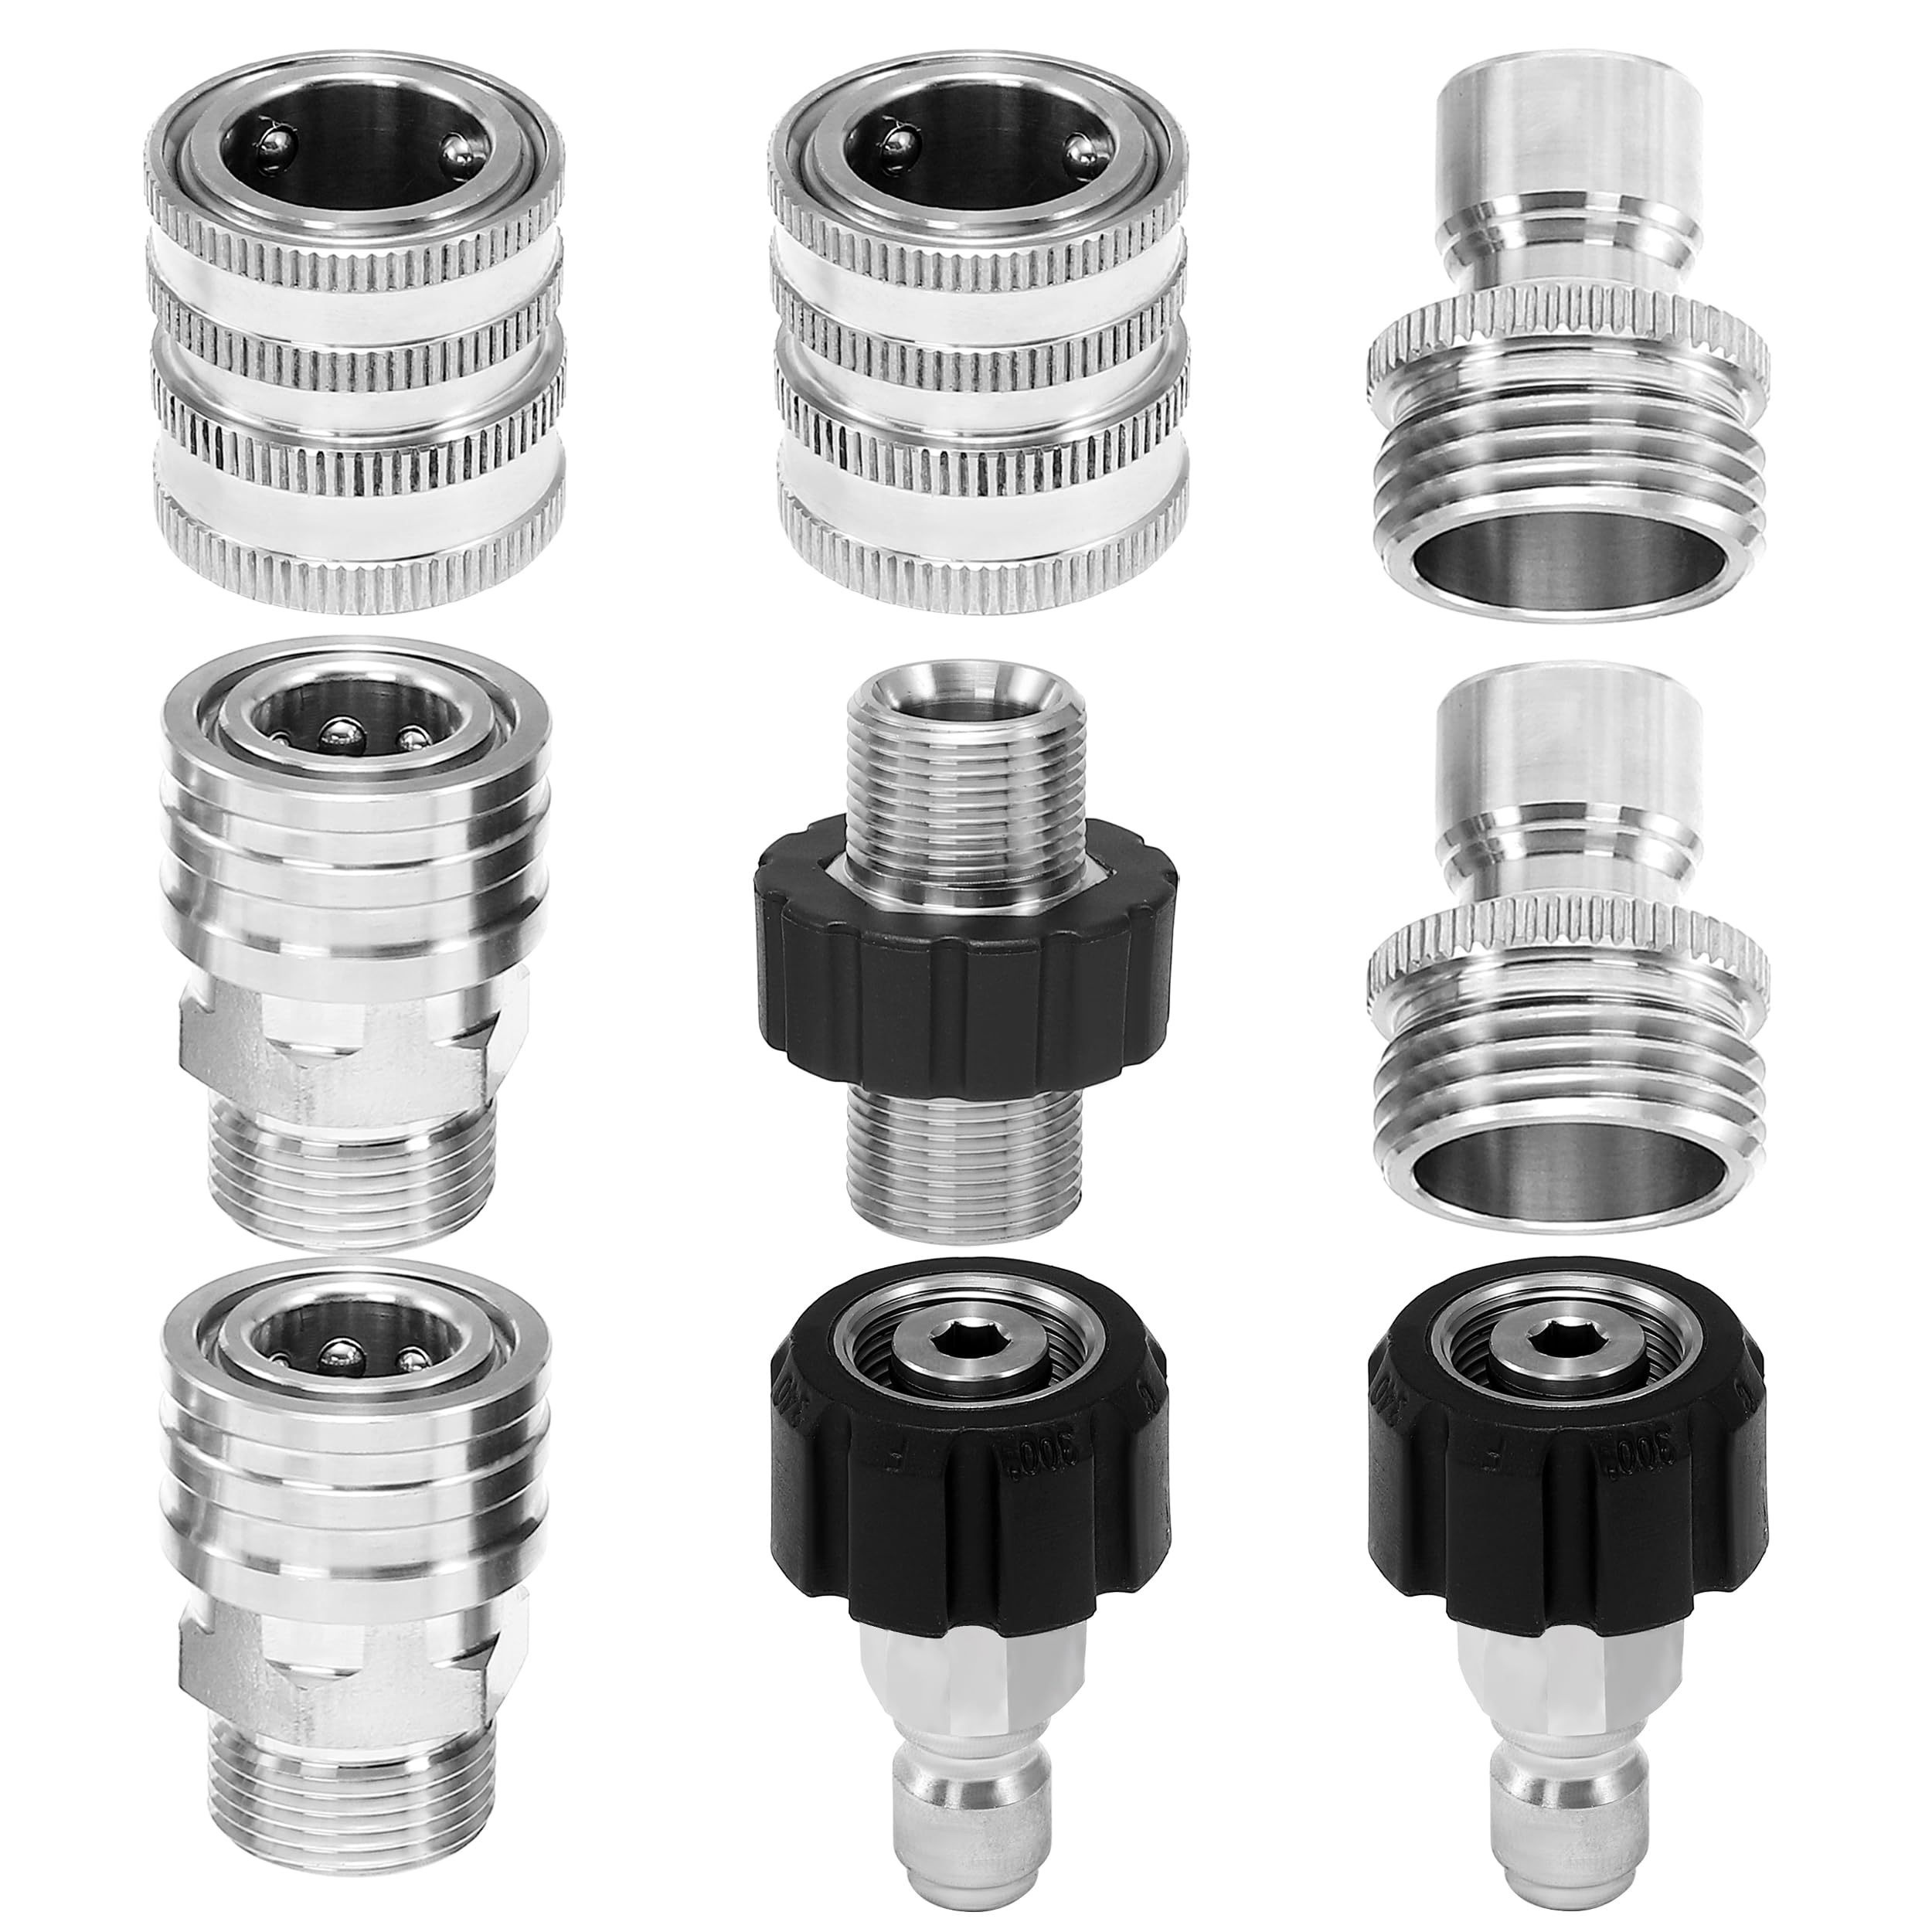 

9pcs/set Stainless Steel High Pressure Washer Adapter Quick Connect Fittings M22 Swivel 14mm To 3/8 Inch Kit For Power Washer Set, Slivery Color